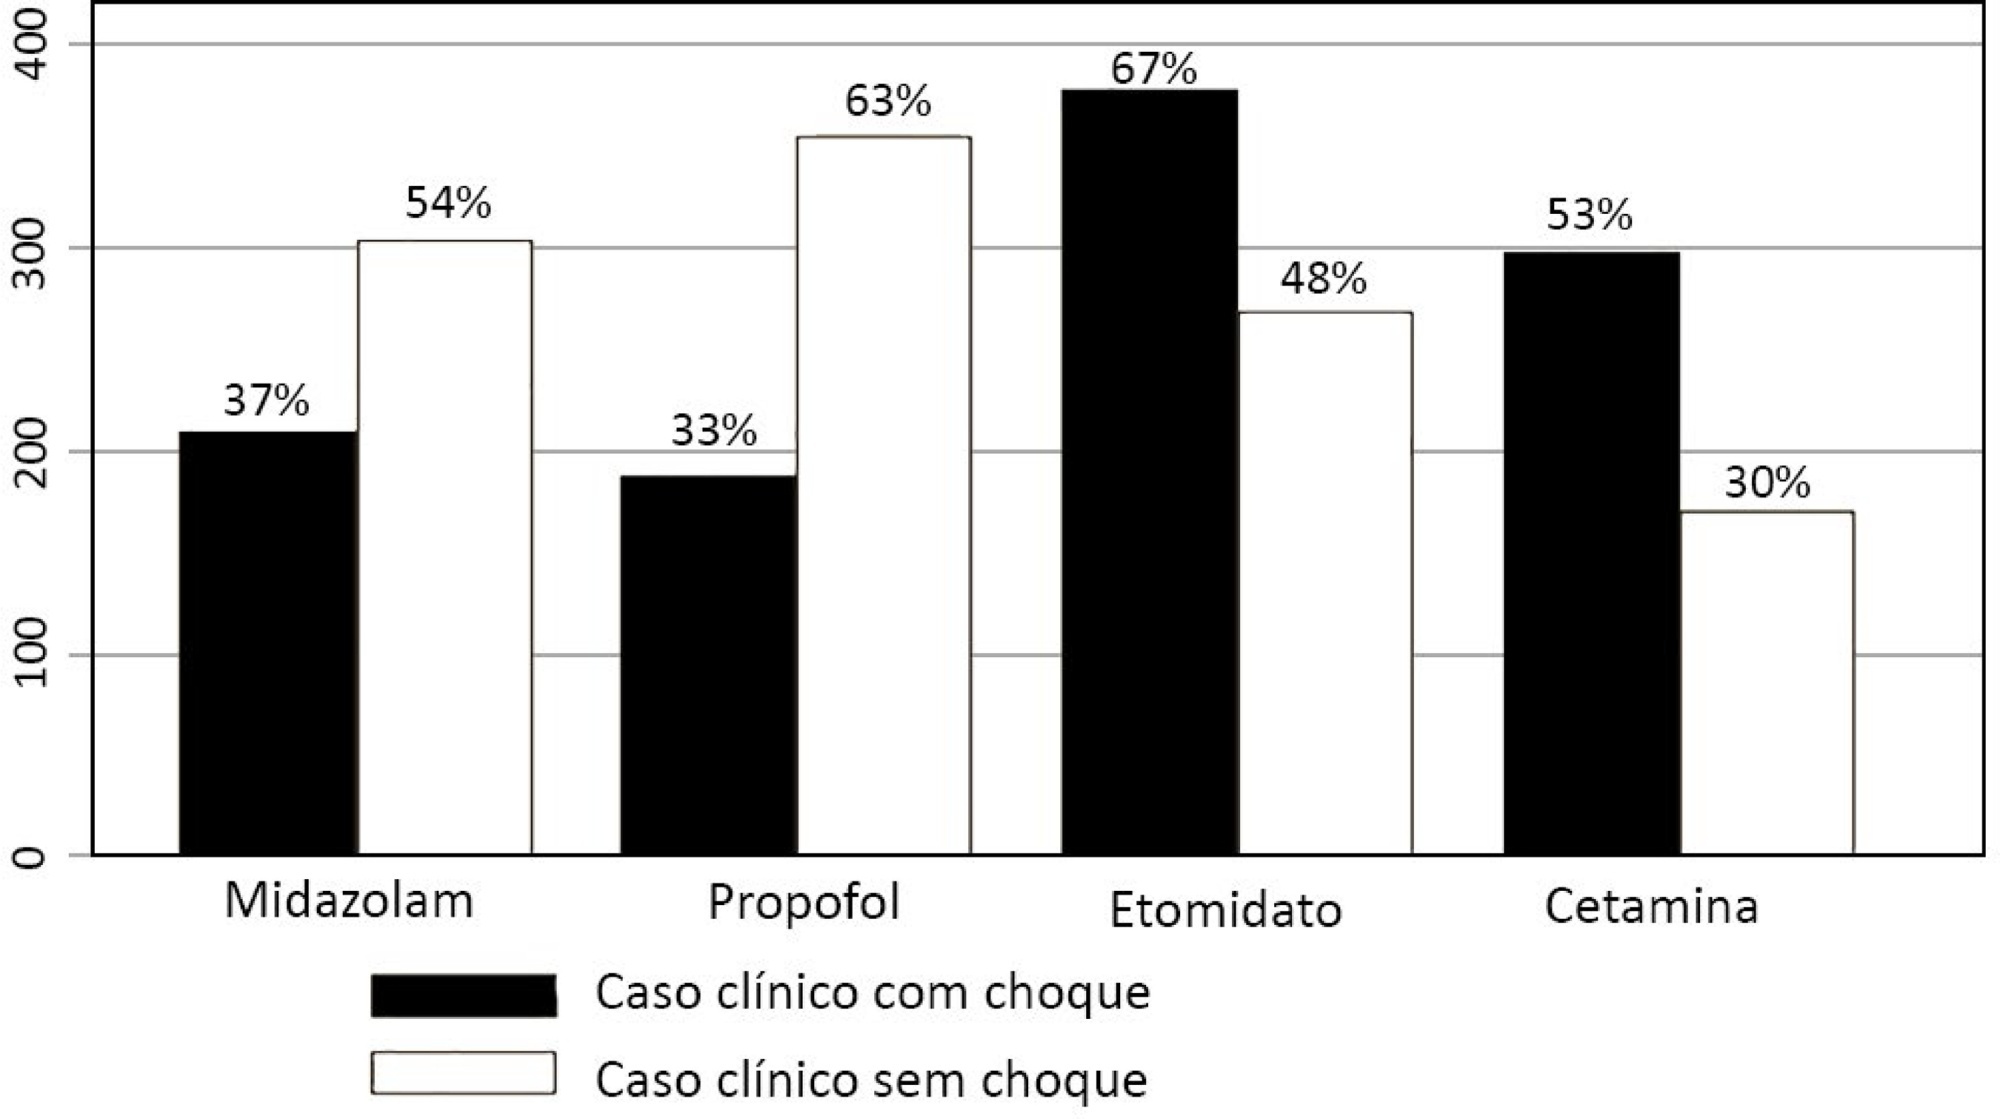 Neuromuscular blockade and airway management during endotracheal intubation in Brazilian intensive care units: a national survey